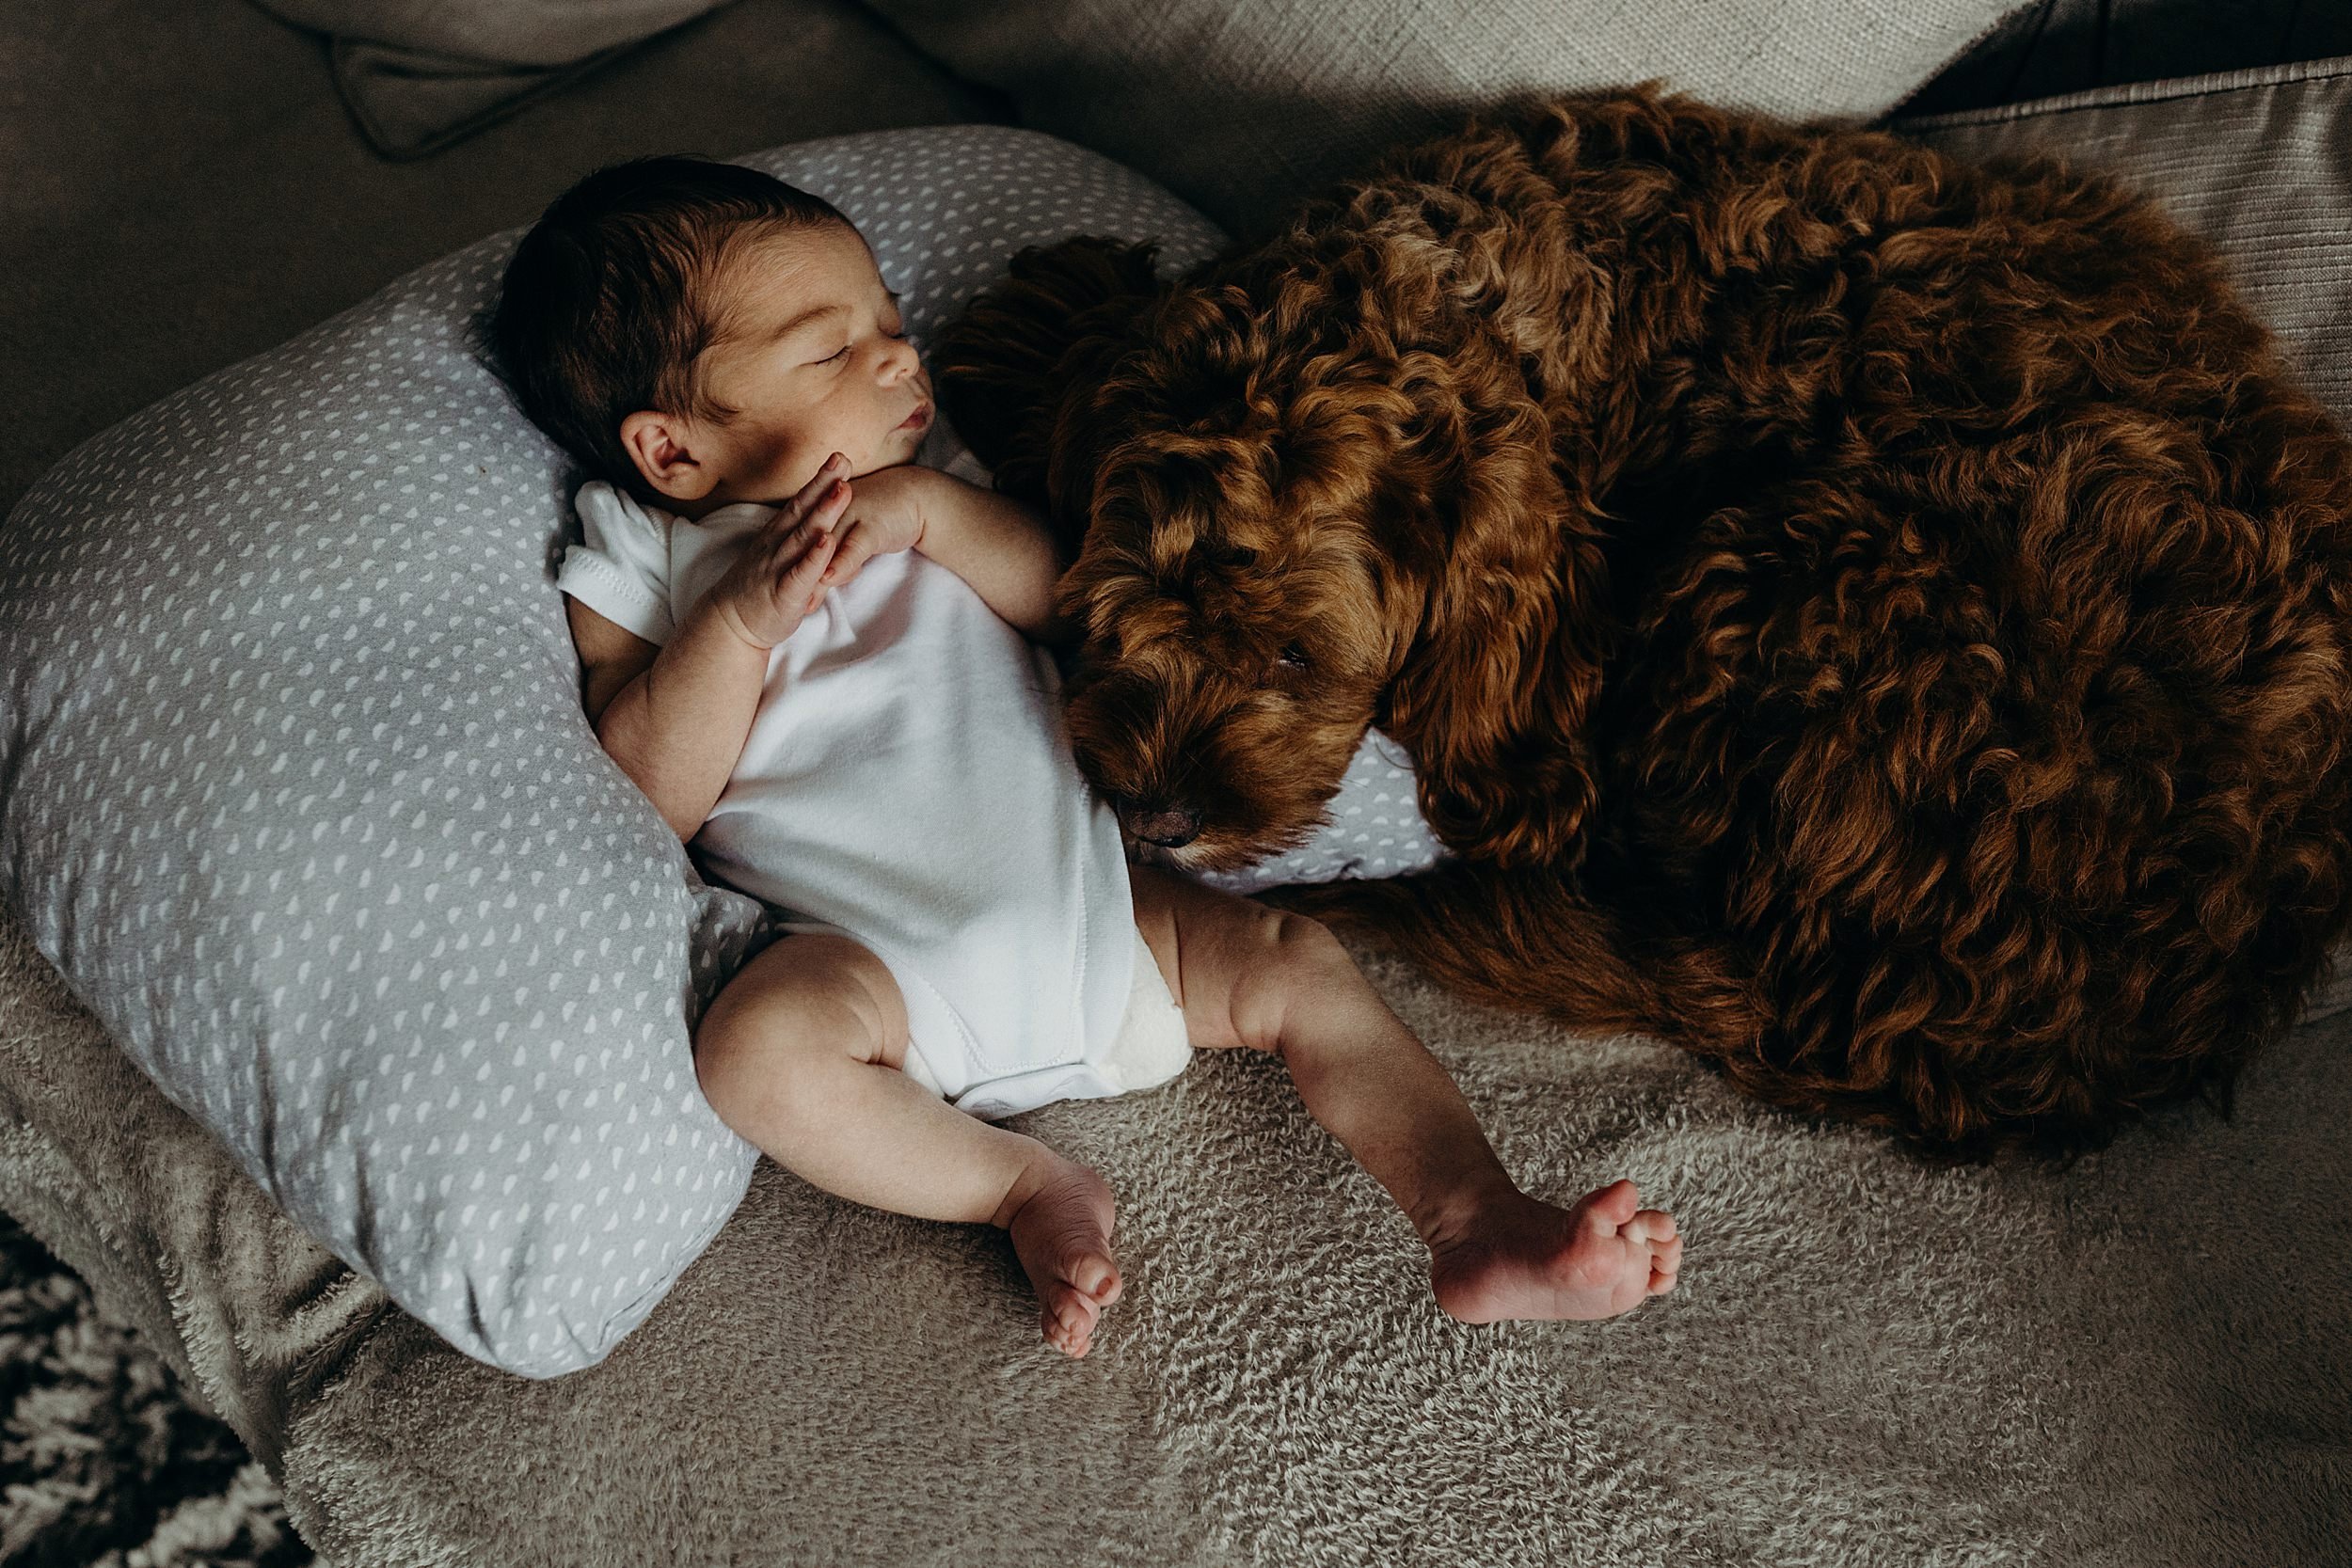 newborn photography glasgow shoot showing a baby boy and brown dog lying together on a grey and white cushion